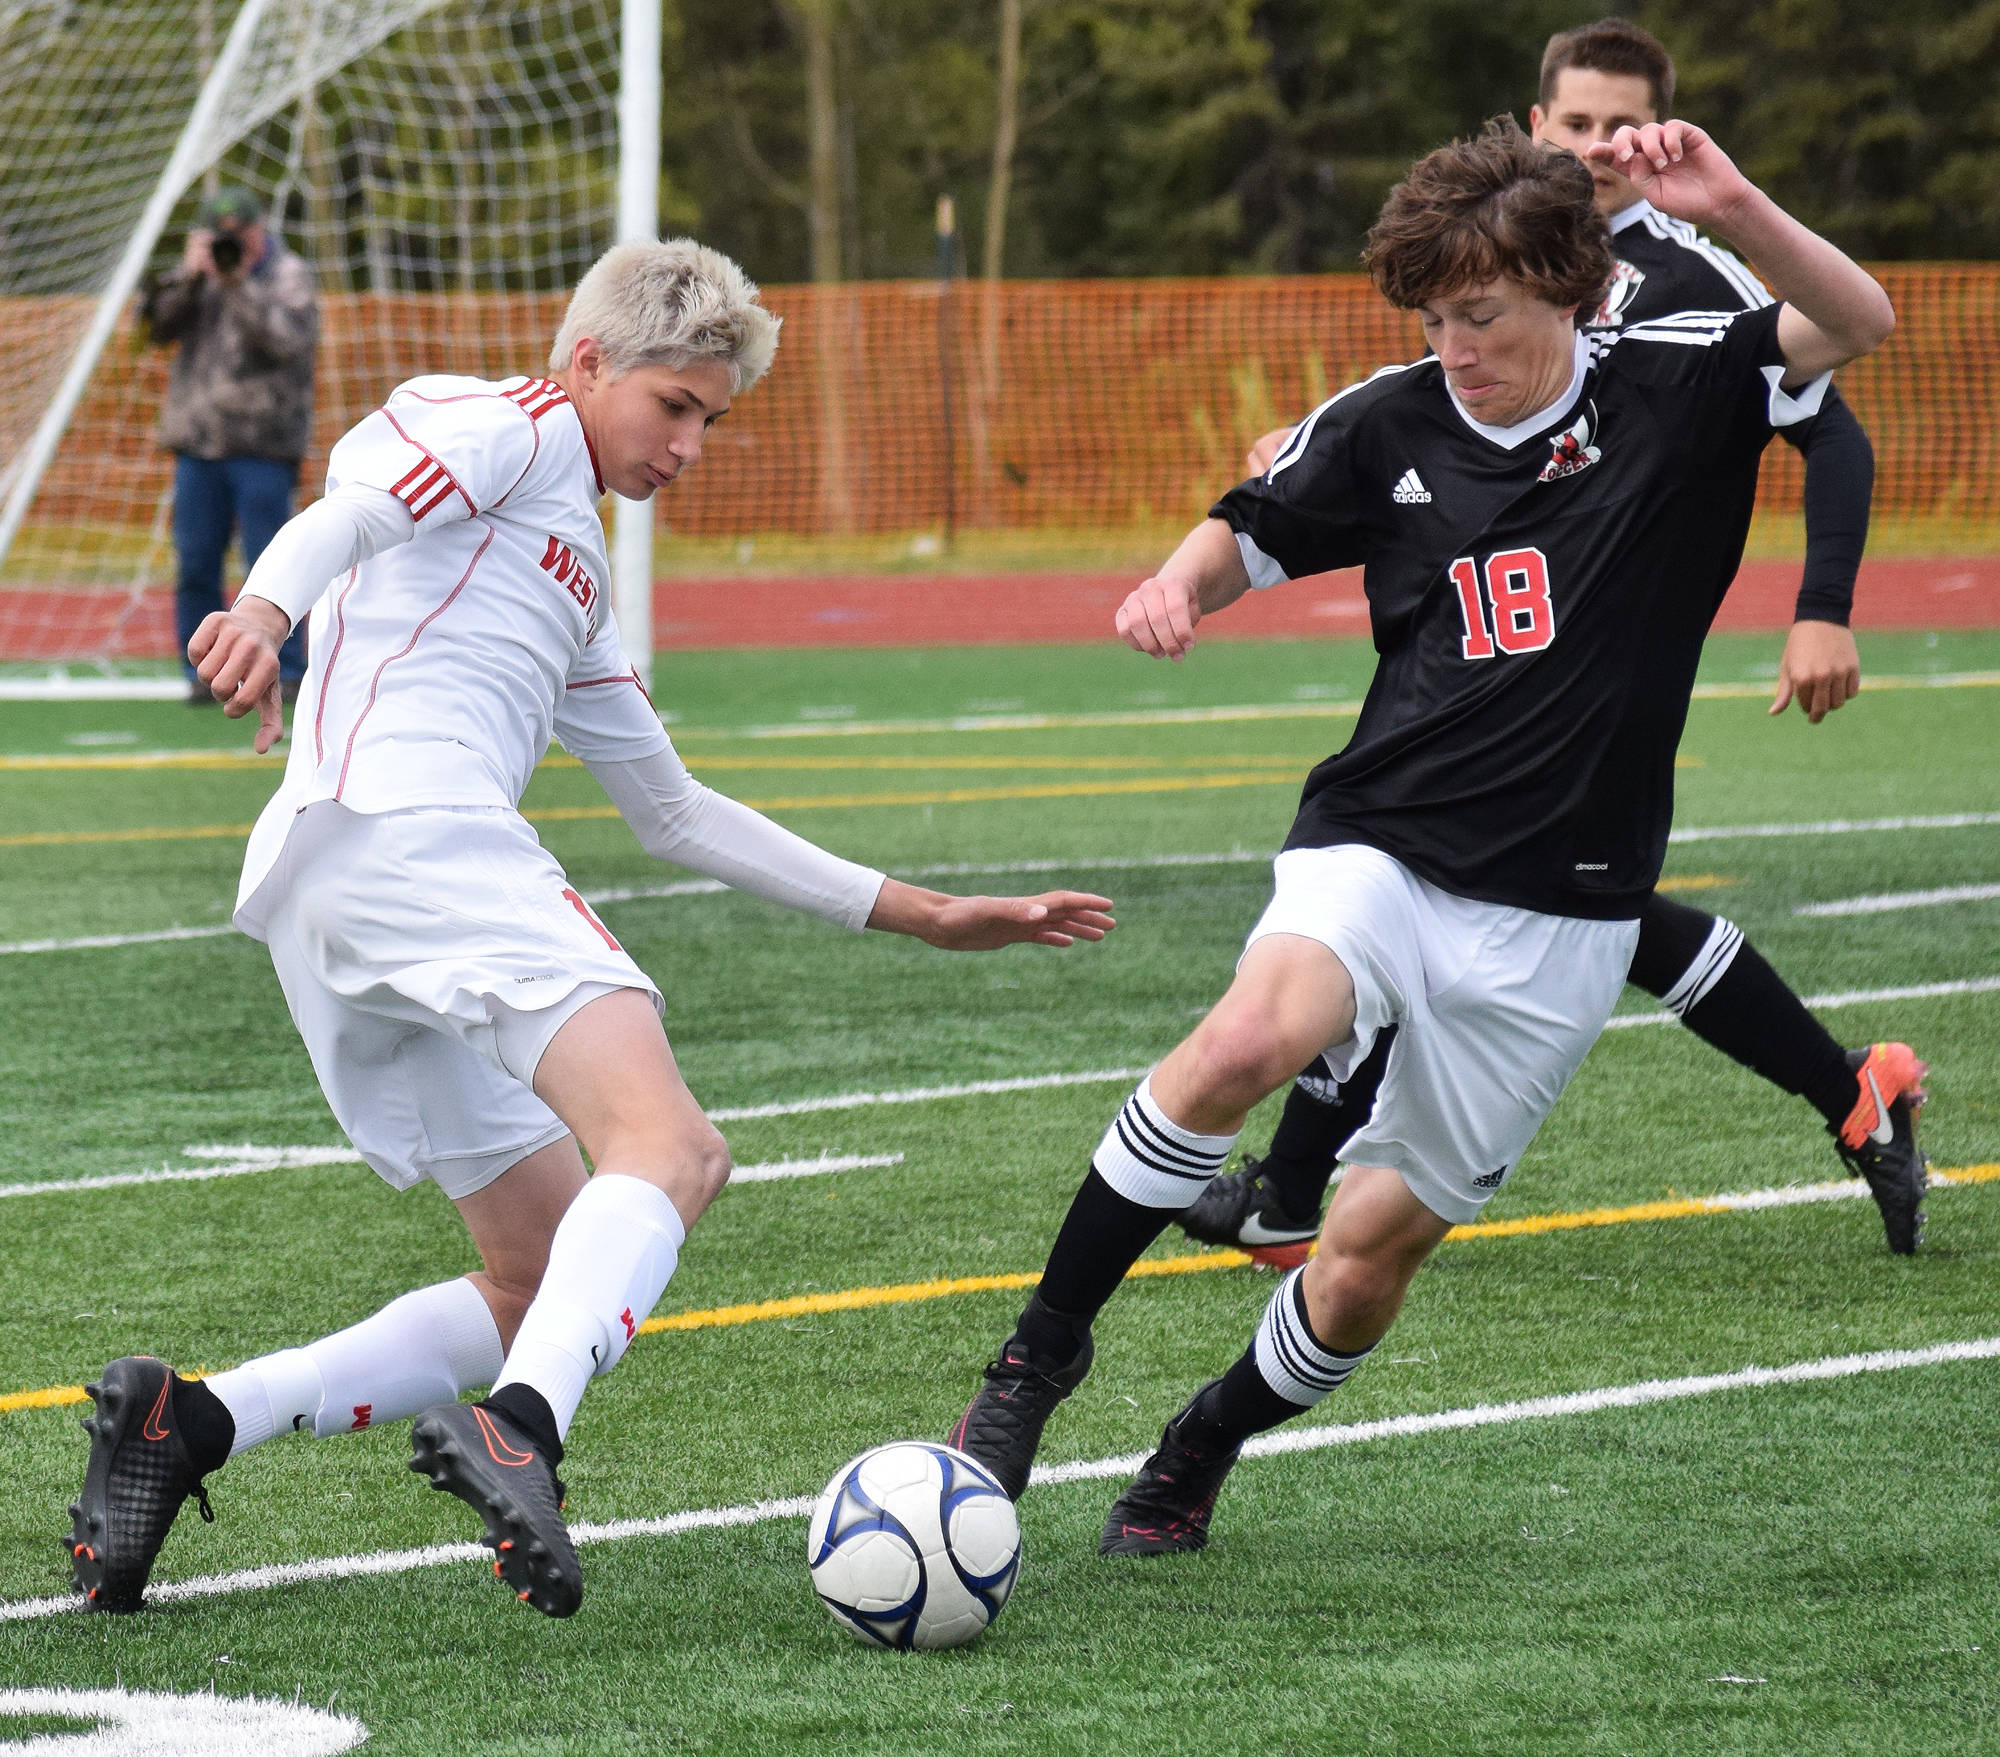 West Valley’s Vaughn Simpson (left) battles for possession against Kenai Central’s Damien Redder in Friday’s state tournament semifinal matchup at Service High School. (Photo by Joey Klecka/Peninsula Clarion)